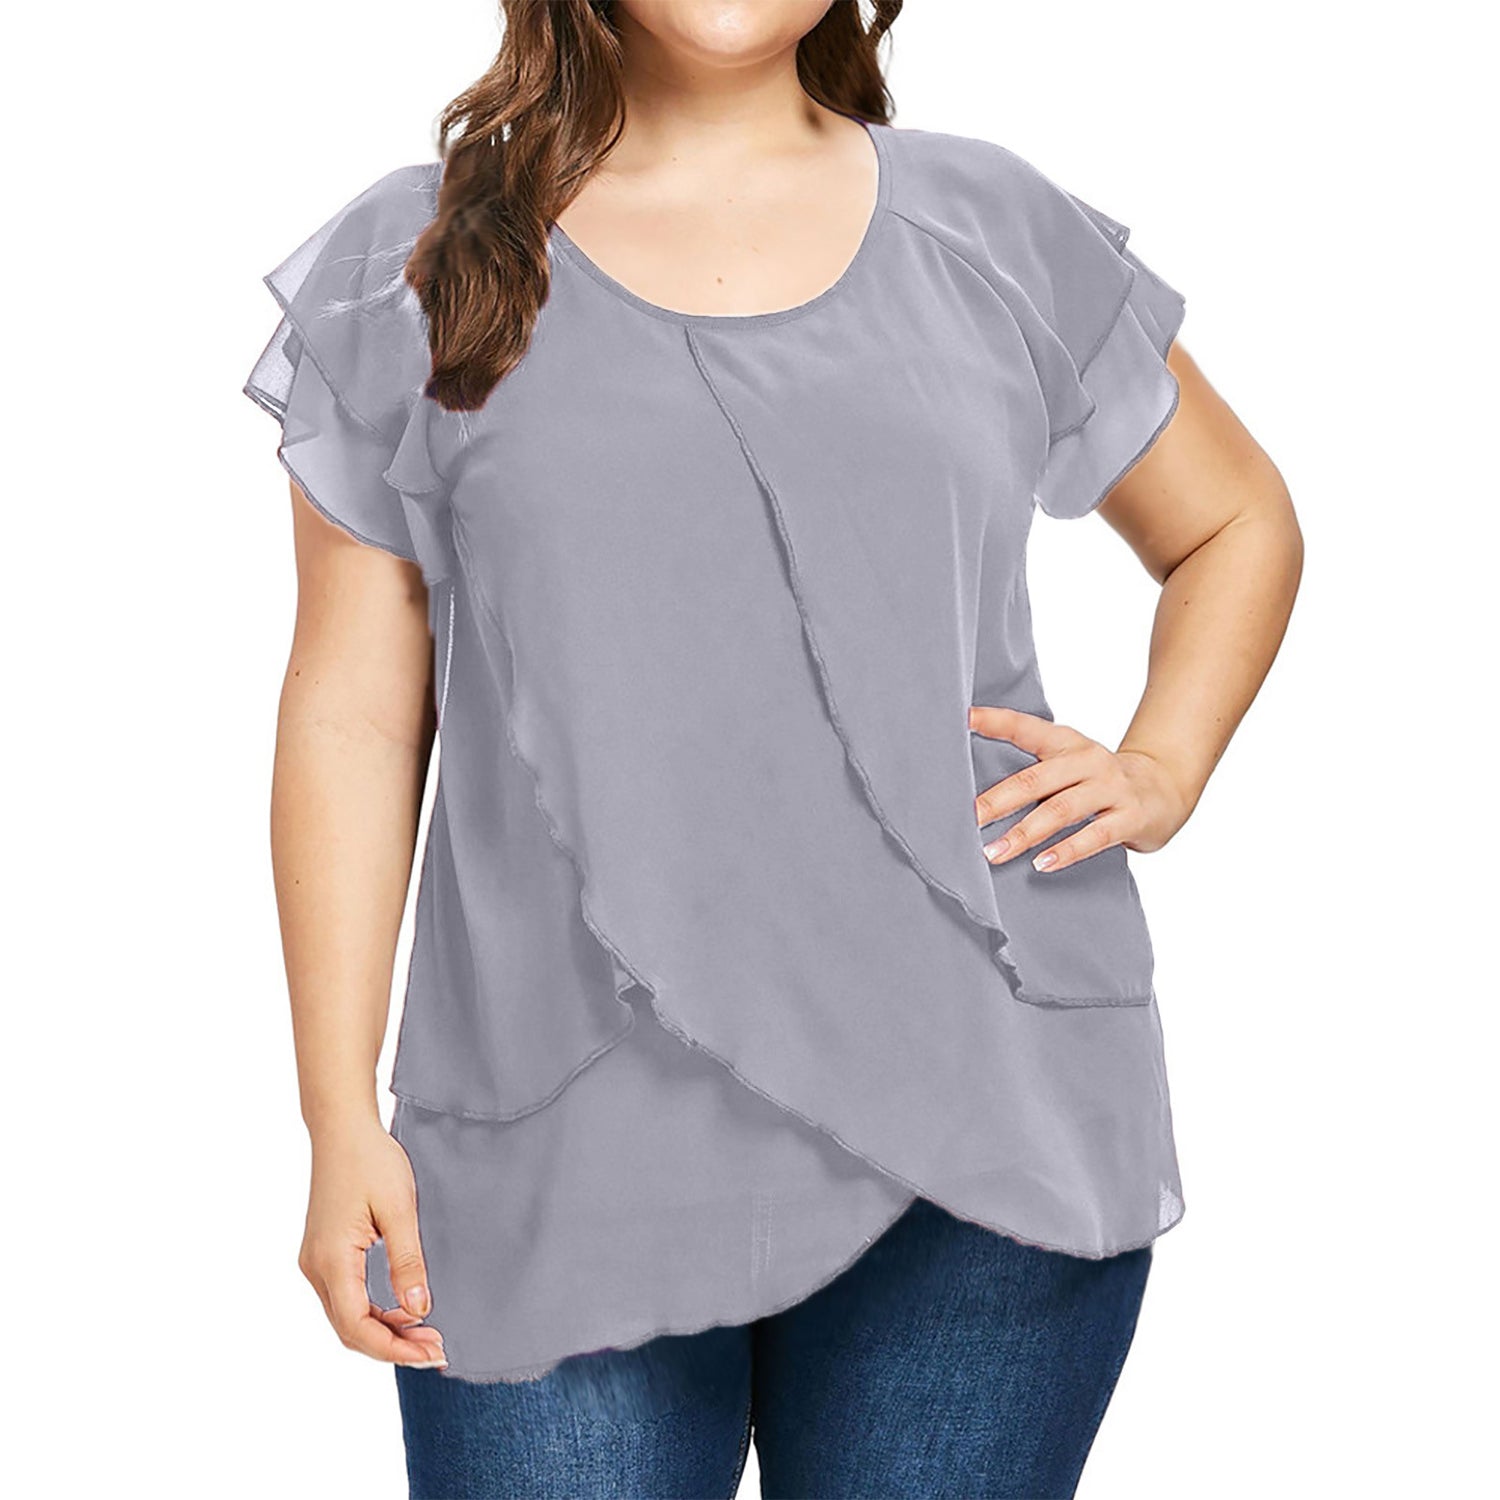 Plus Size Women's Solid Color Chiffon Top  Tops Thecurvestory